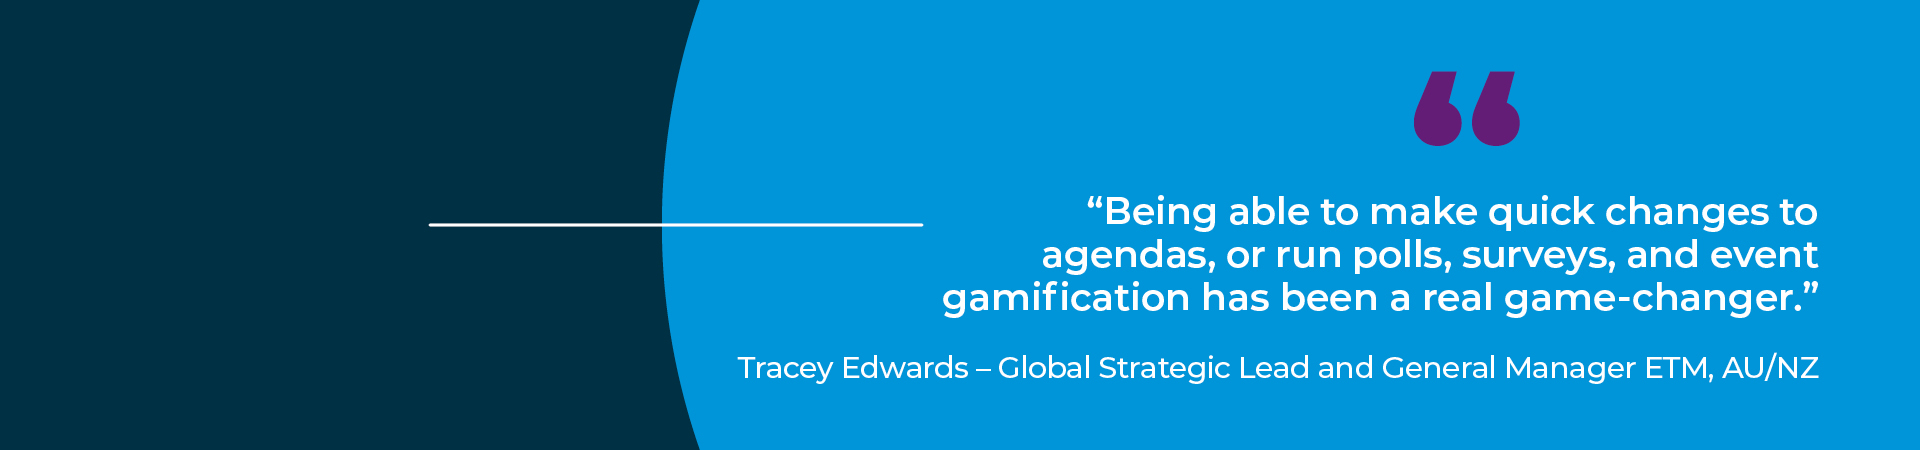 Tracey Edwards quote